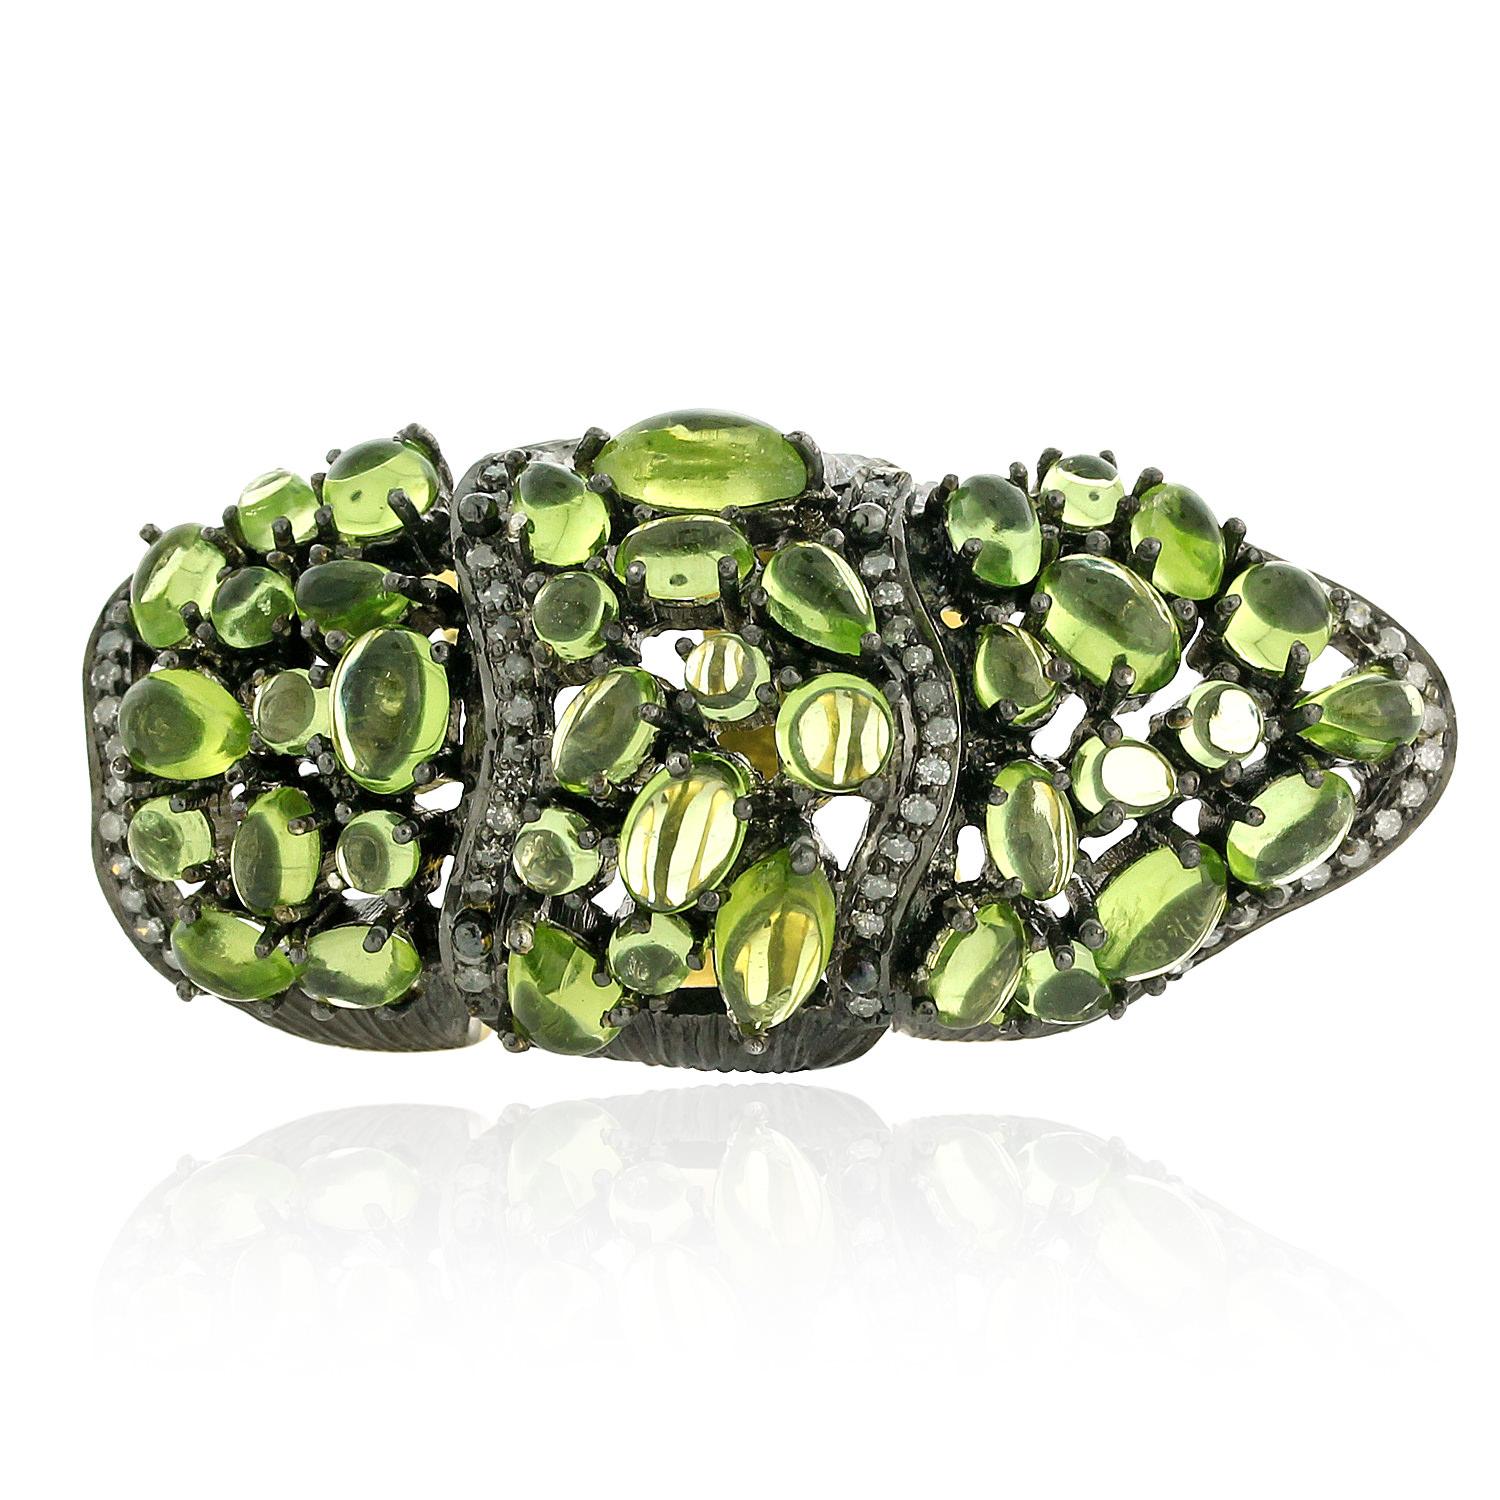 Uneven Shaped Peridot & Pave Diamonds Long Ring Made in 18k Gold & Silver In New Condition For Sale In New York, NY